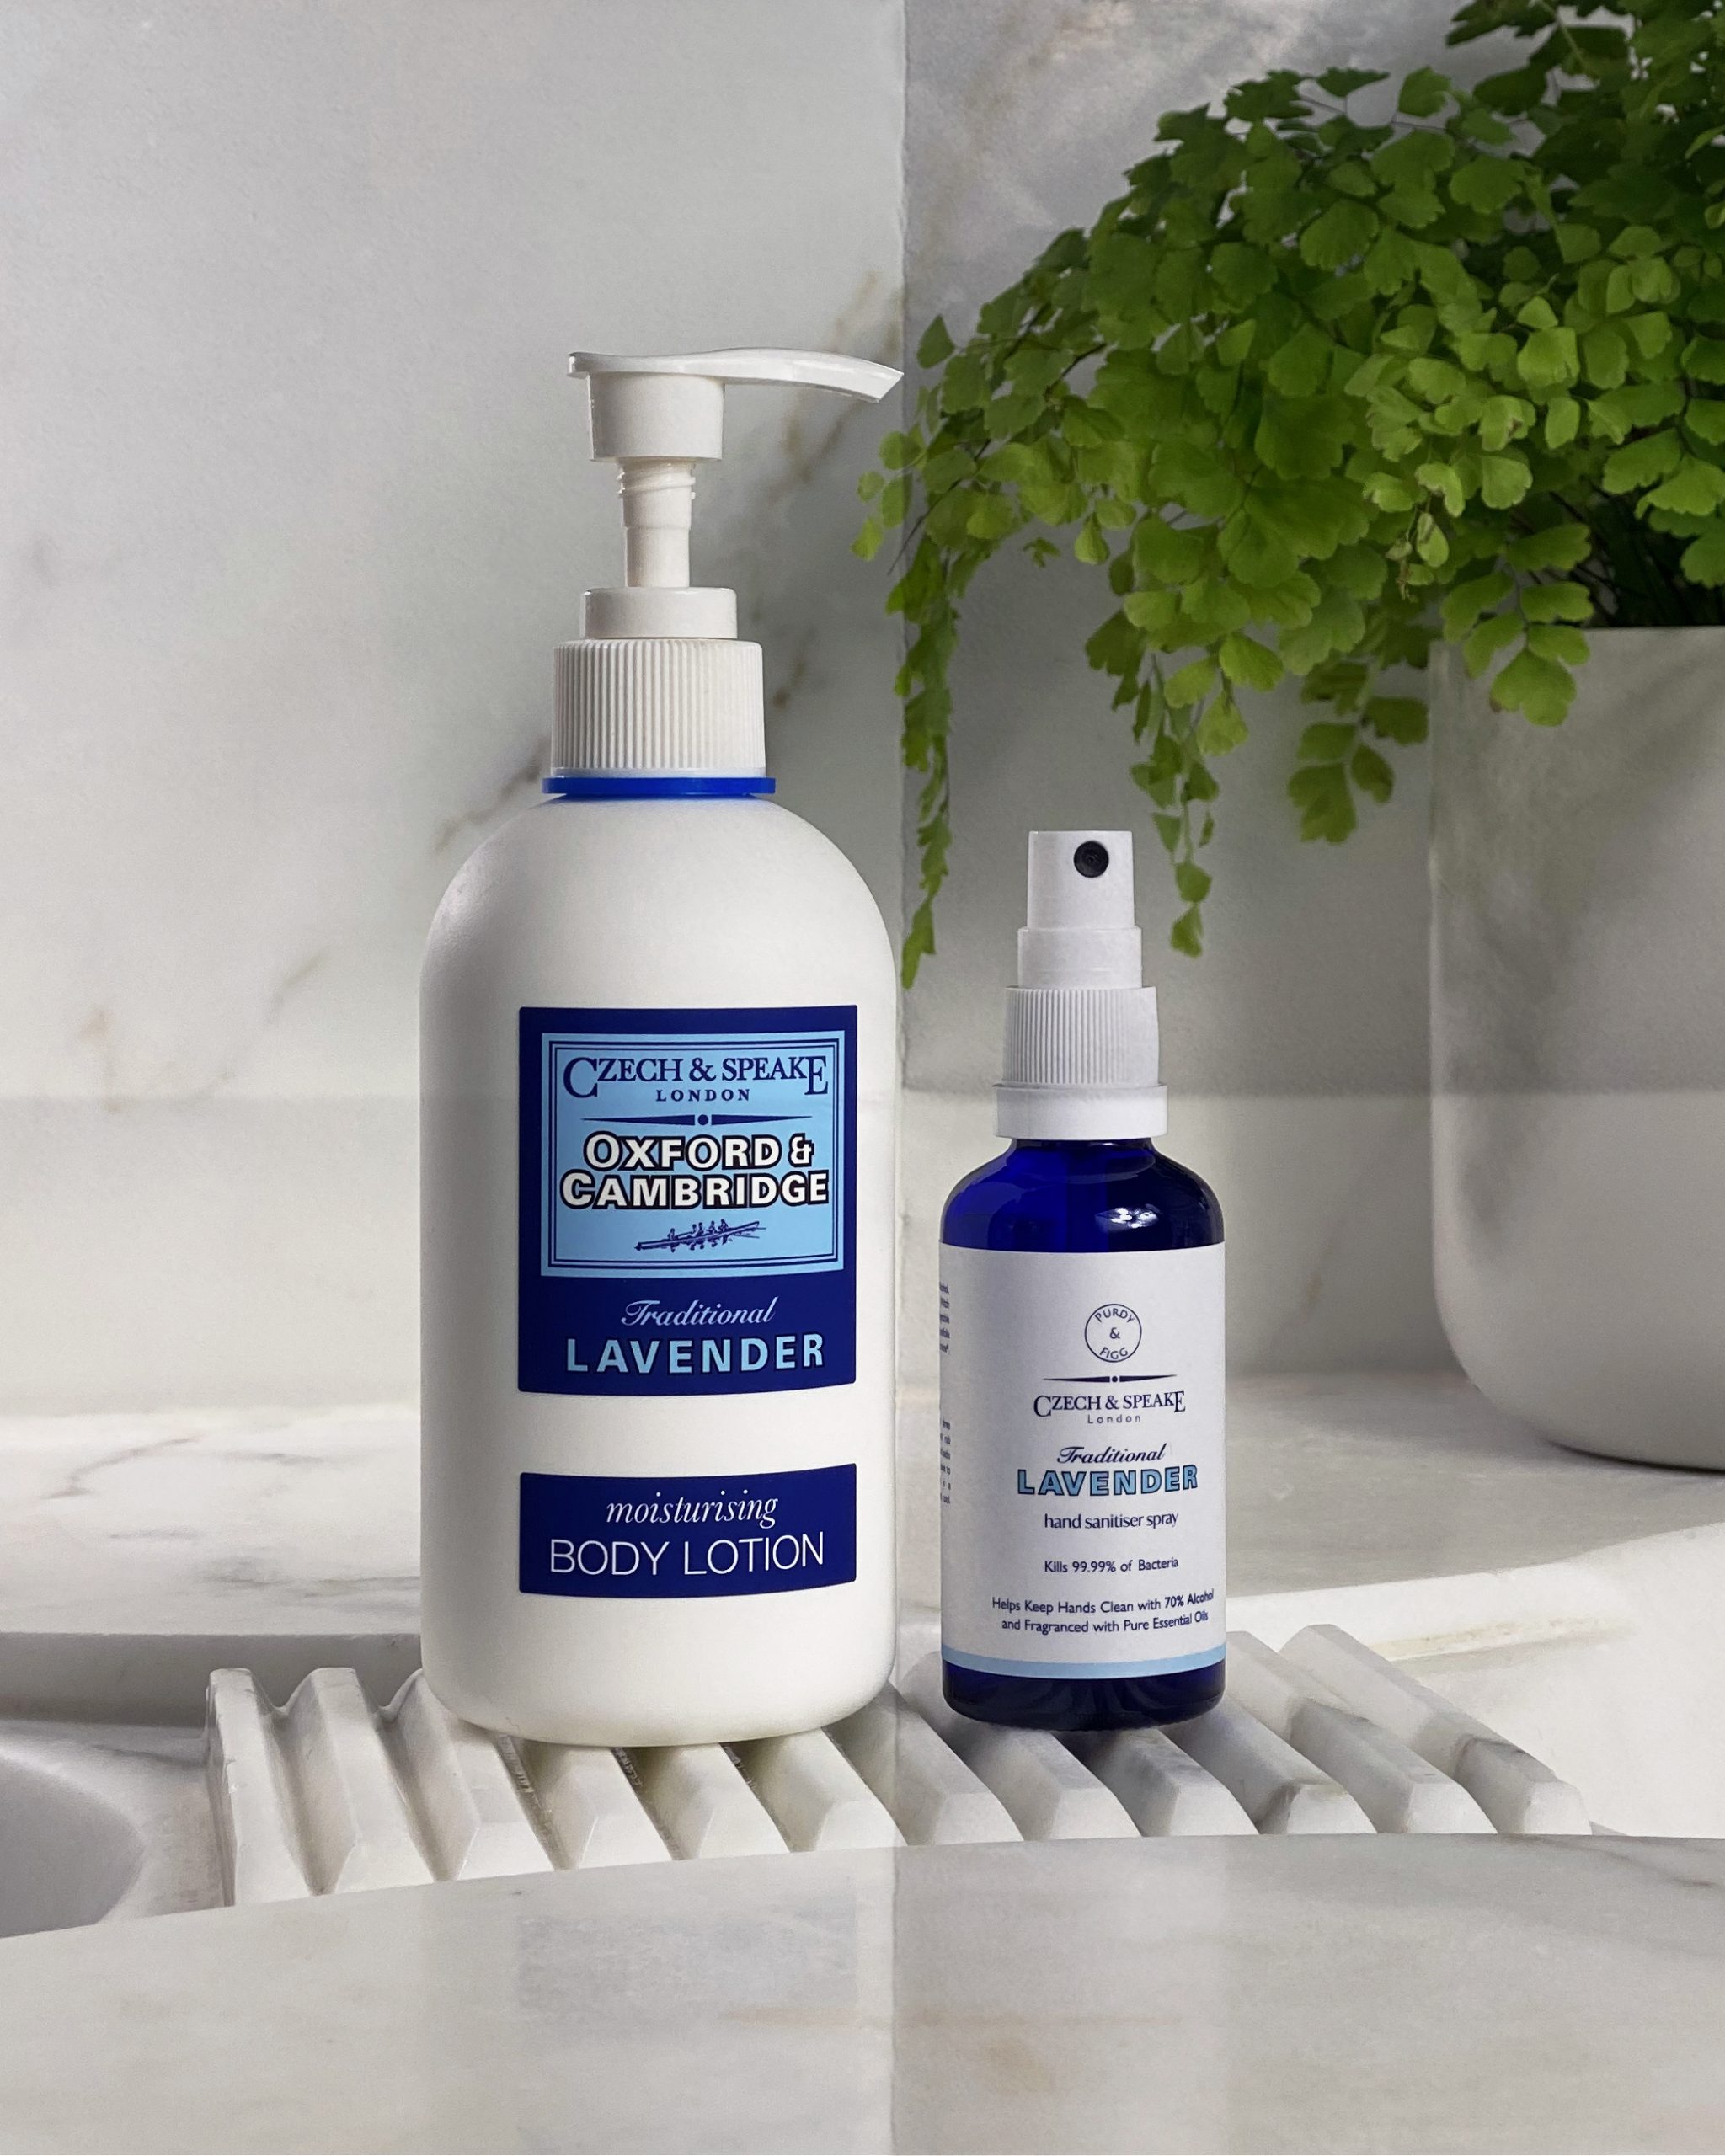 Oxford & Cambridge body lotion and lavender hand sanitiser on marble sink